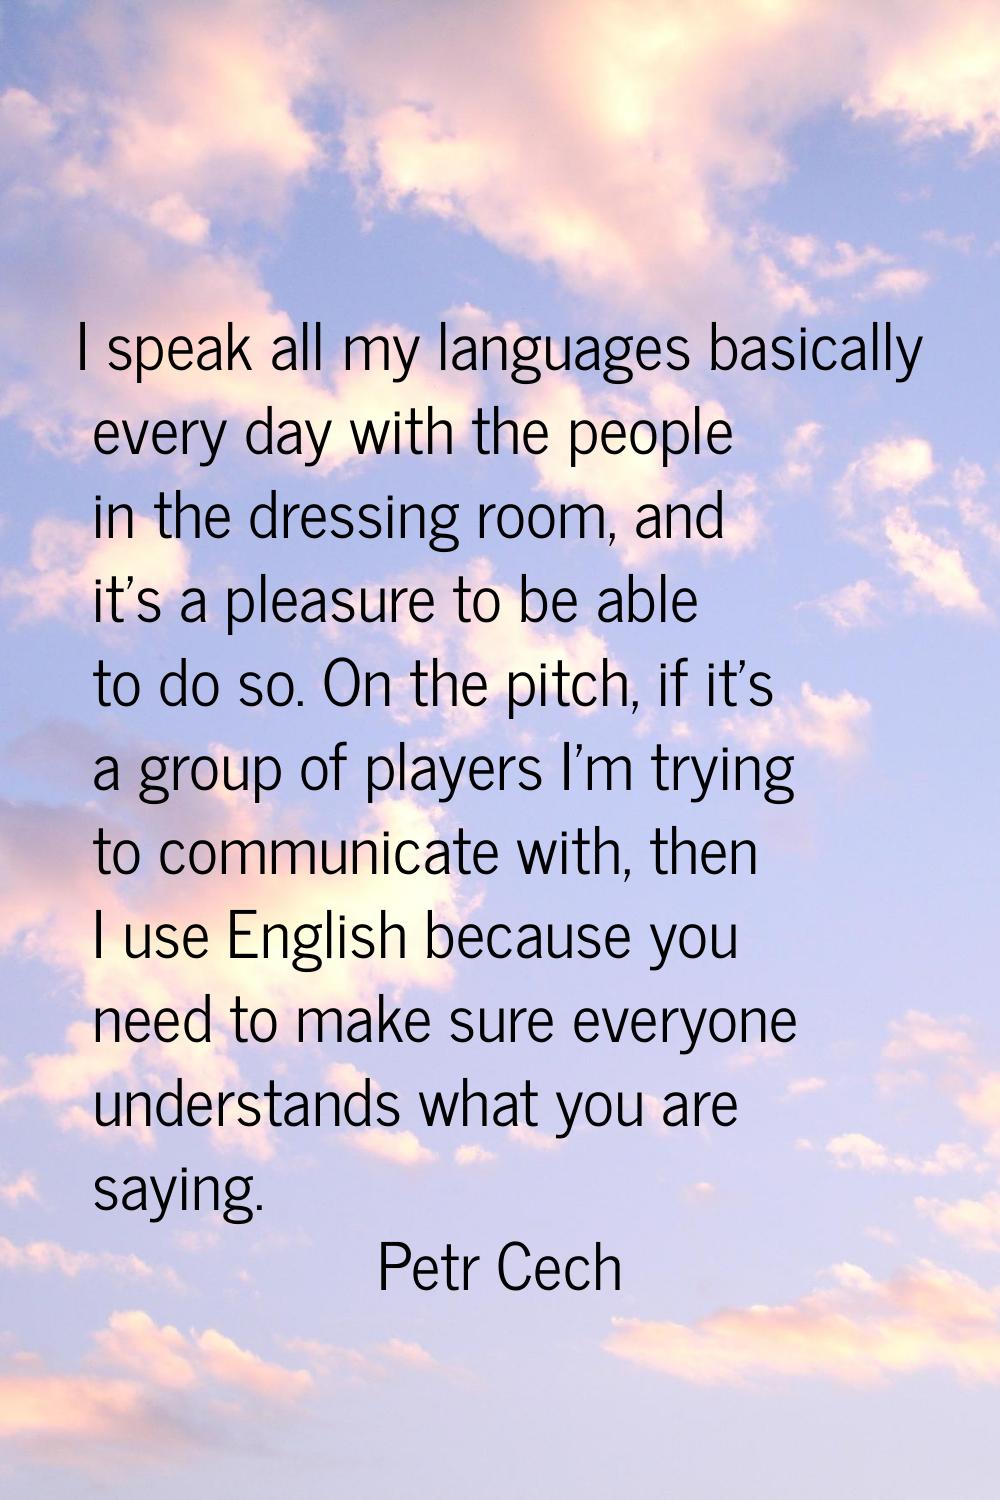 I speak all my languages basically every day with the people in the dressing room, and it's a pleas